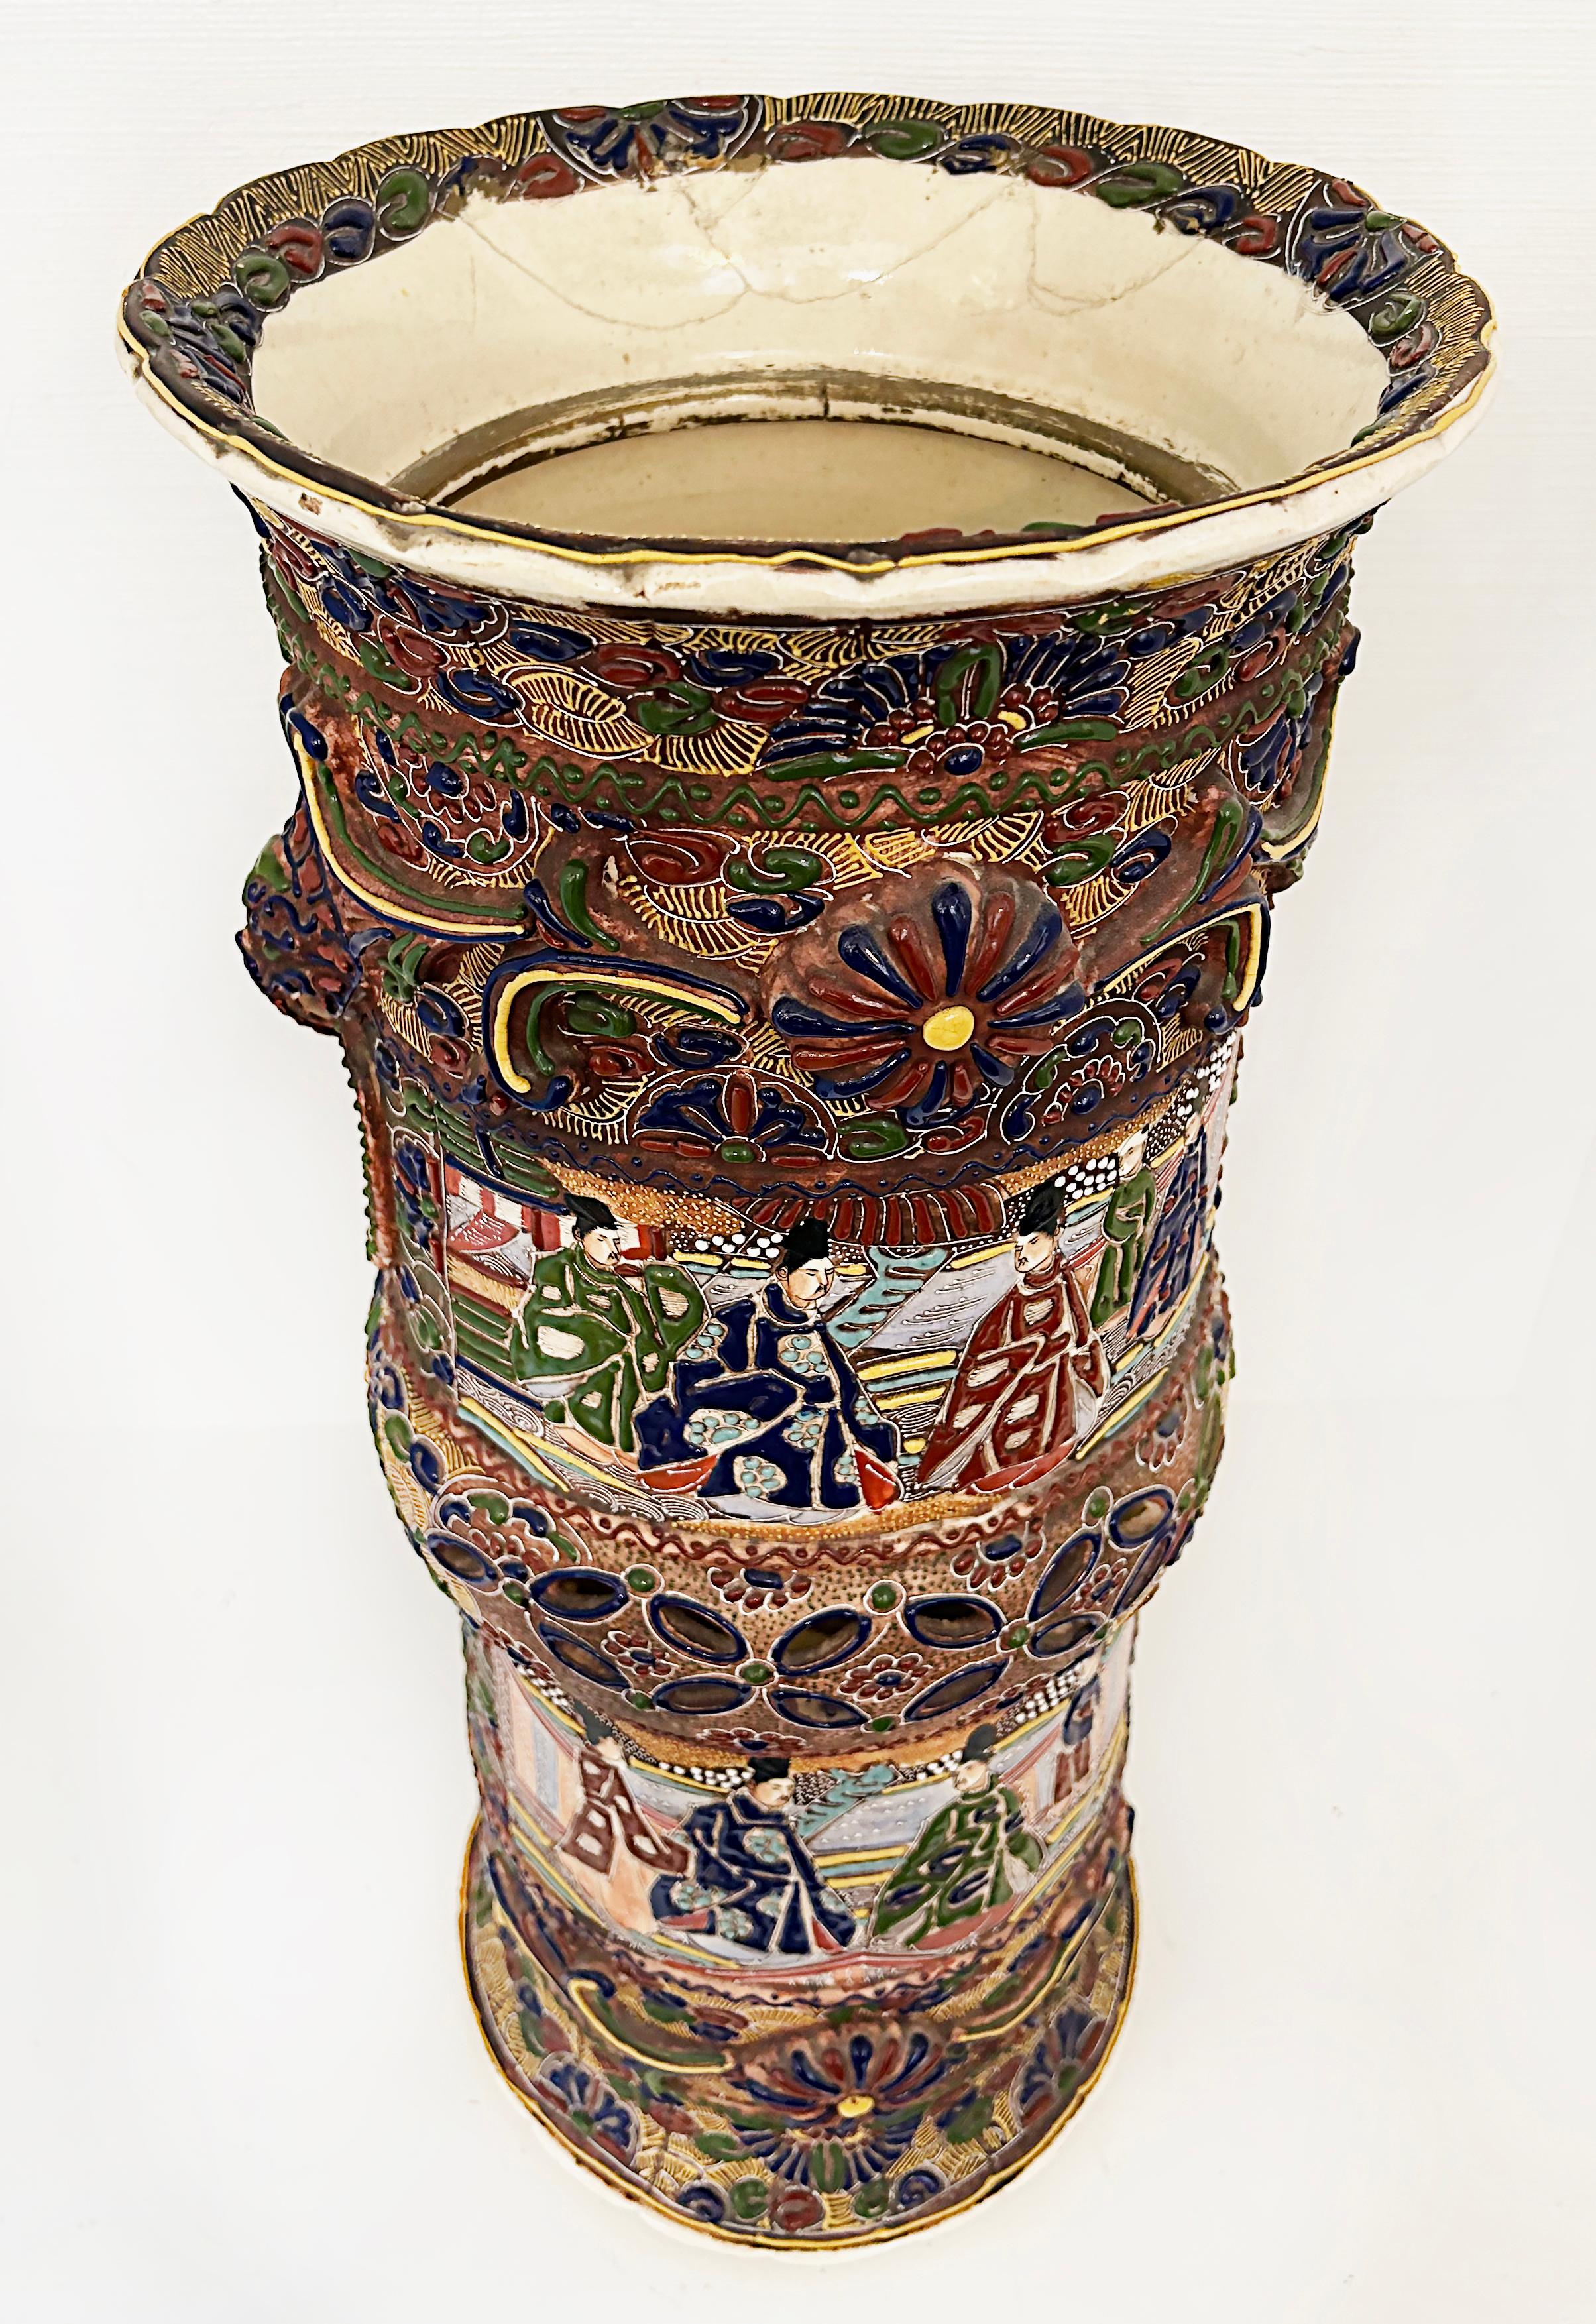 Japanese Imari Umbrella Walking Stick Stand

Offered for sale is an ornate early to mid-20th-century Japanese raised-enamel Imari umbrella stand. The piece is heavily decorated around the complete surface. There are older repairs as shown.